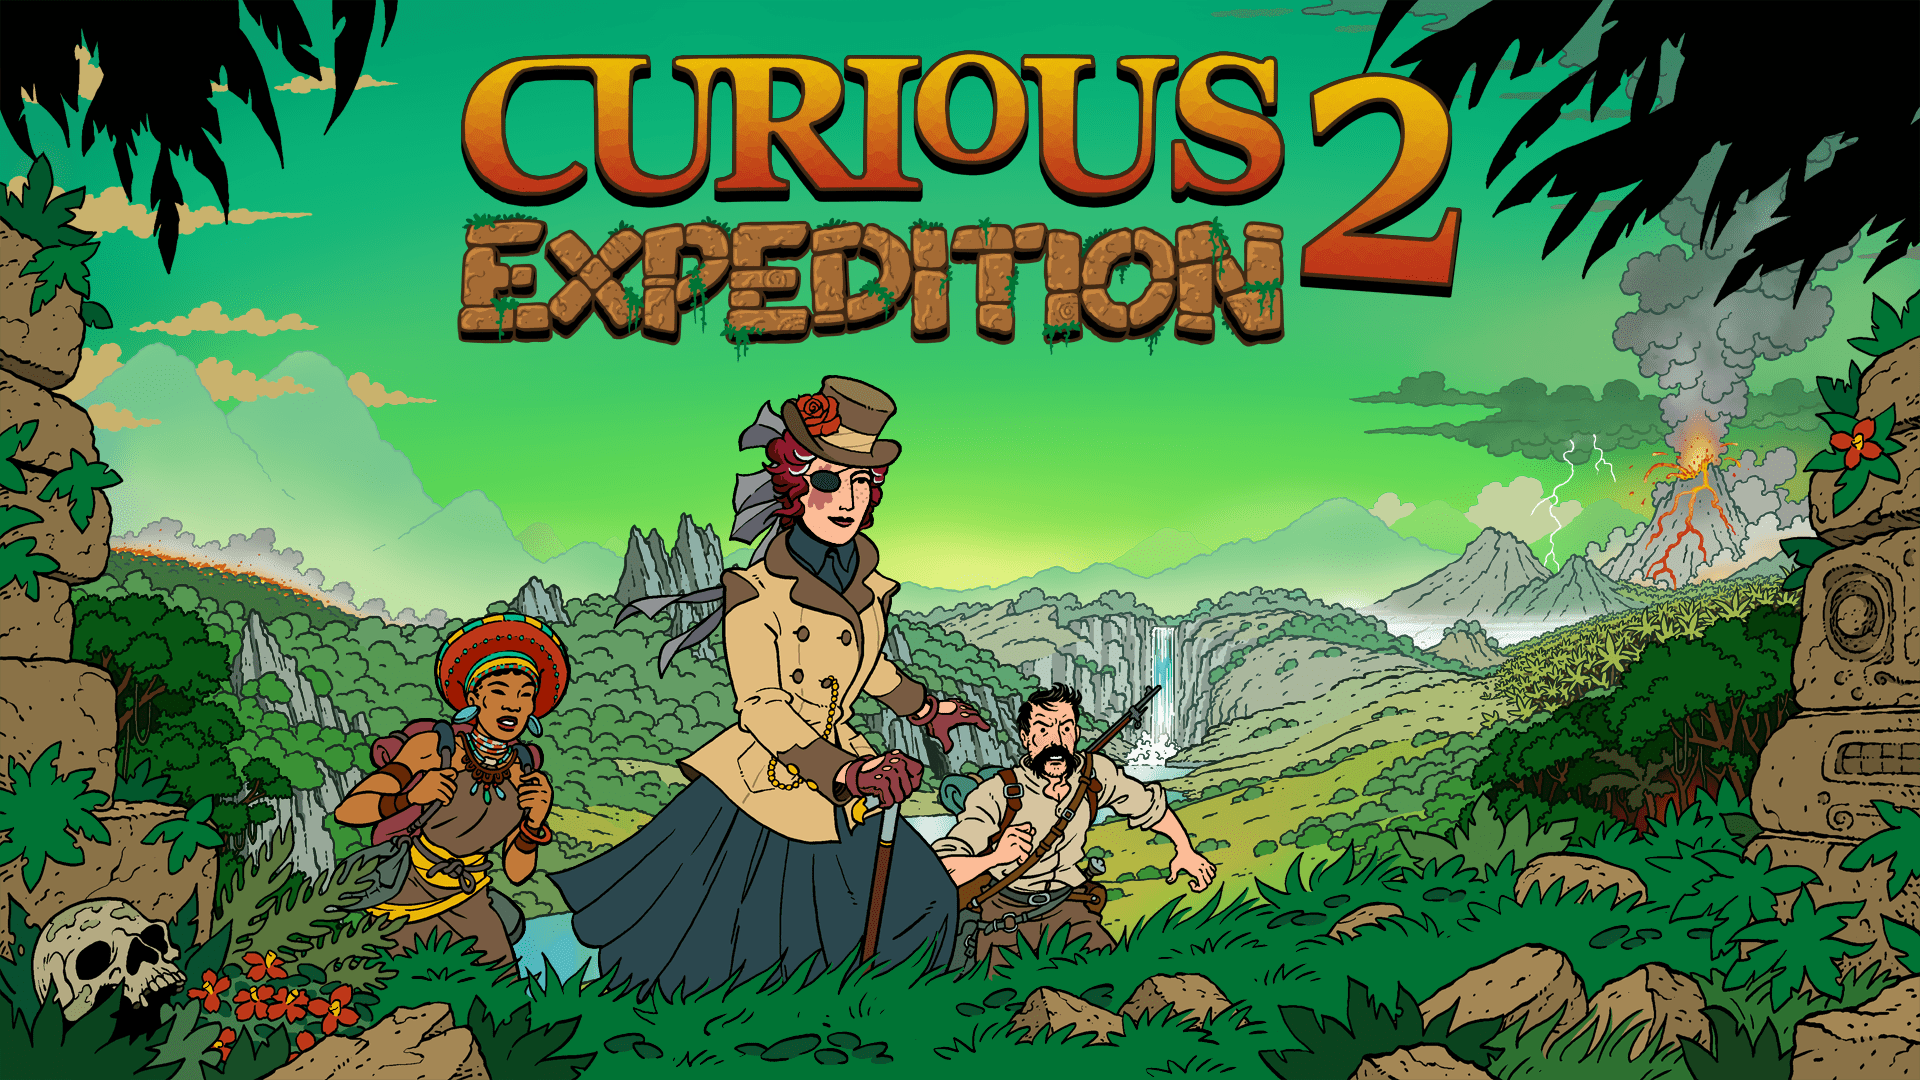 Curious Expedition 2, Robots Of Lux chega hoje